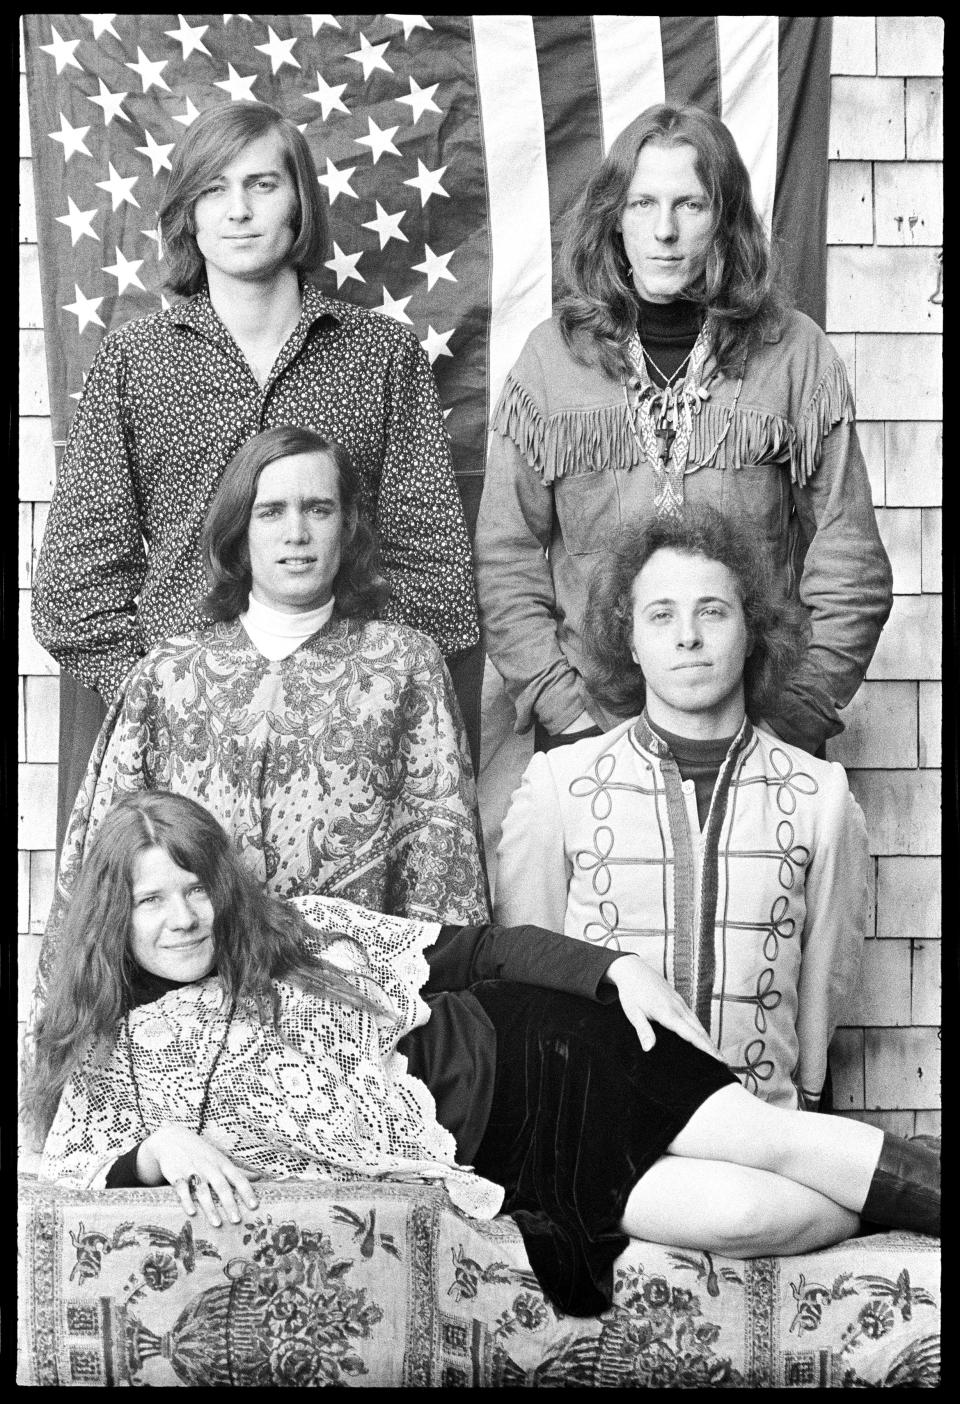 Janis Joplin (bottom) with her band, Big Brother and the Holding Company. Eventually the group disbanded, with Joplin going off on her own until her tragic overdose death a few years later. Joplin started as a folk singer but became an overnight sensation on the streets of San Francisco in the late '60s.